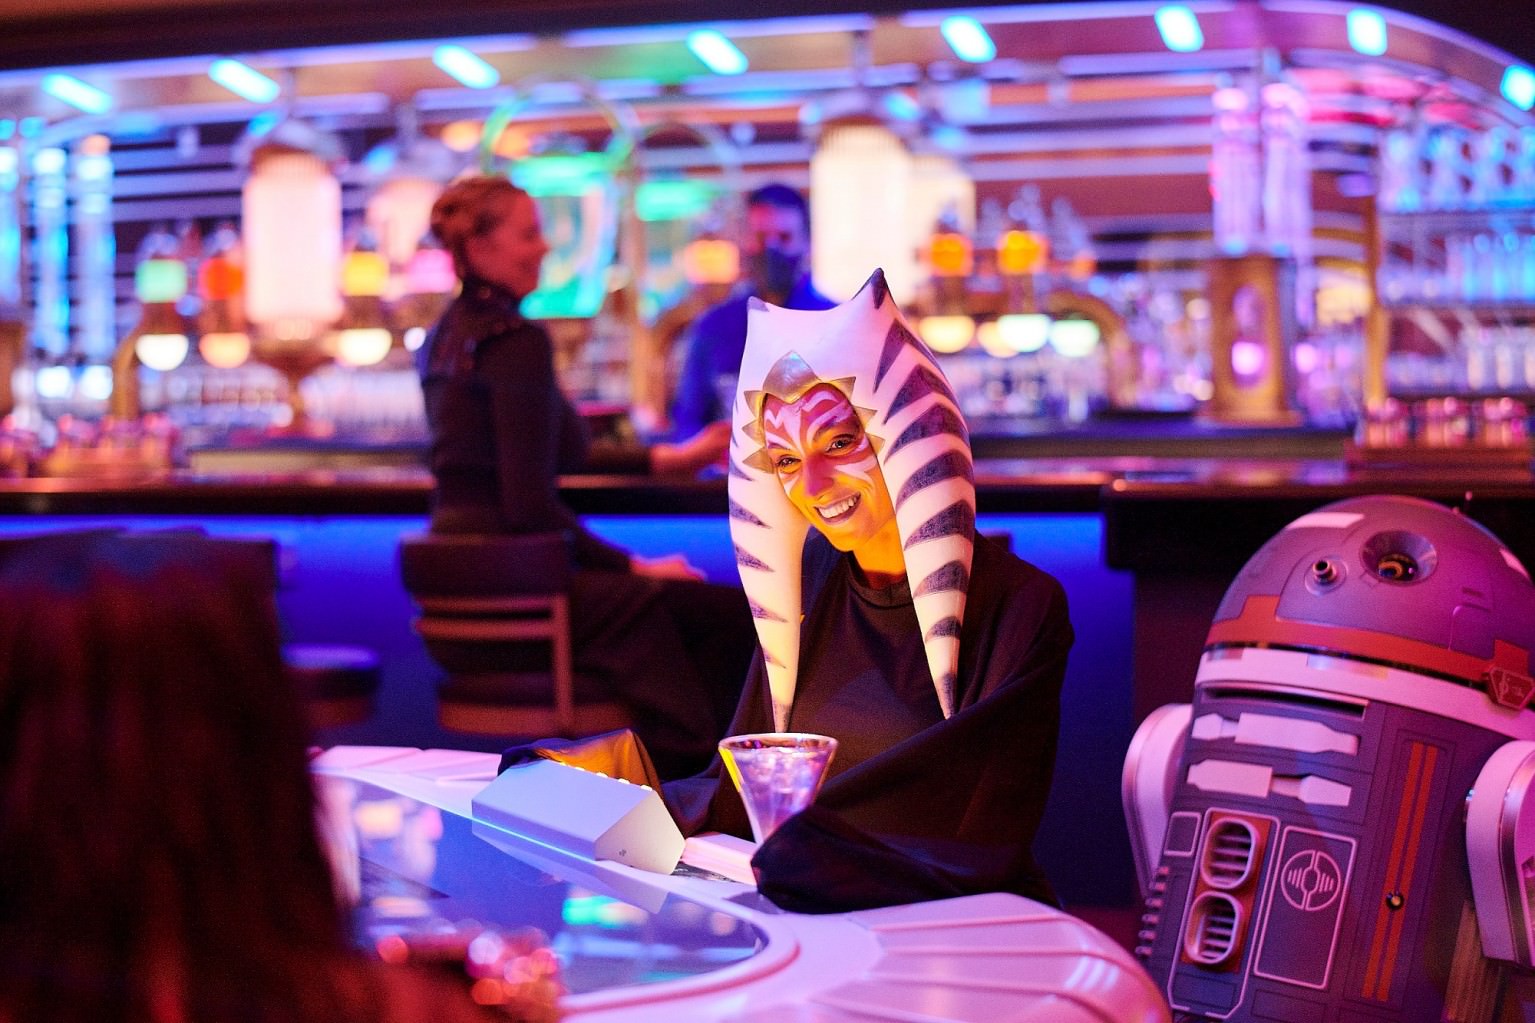 A Togruta passenger on board the Star Wars Galactic Starcruiser enjoys a cocktail